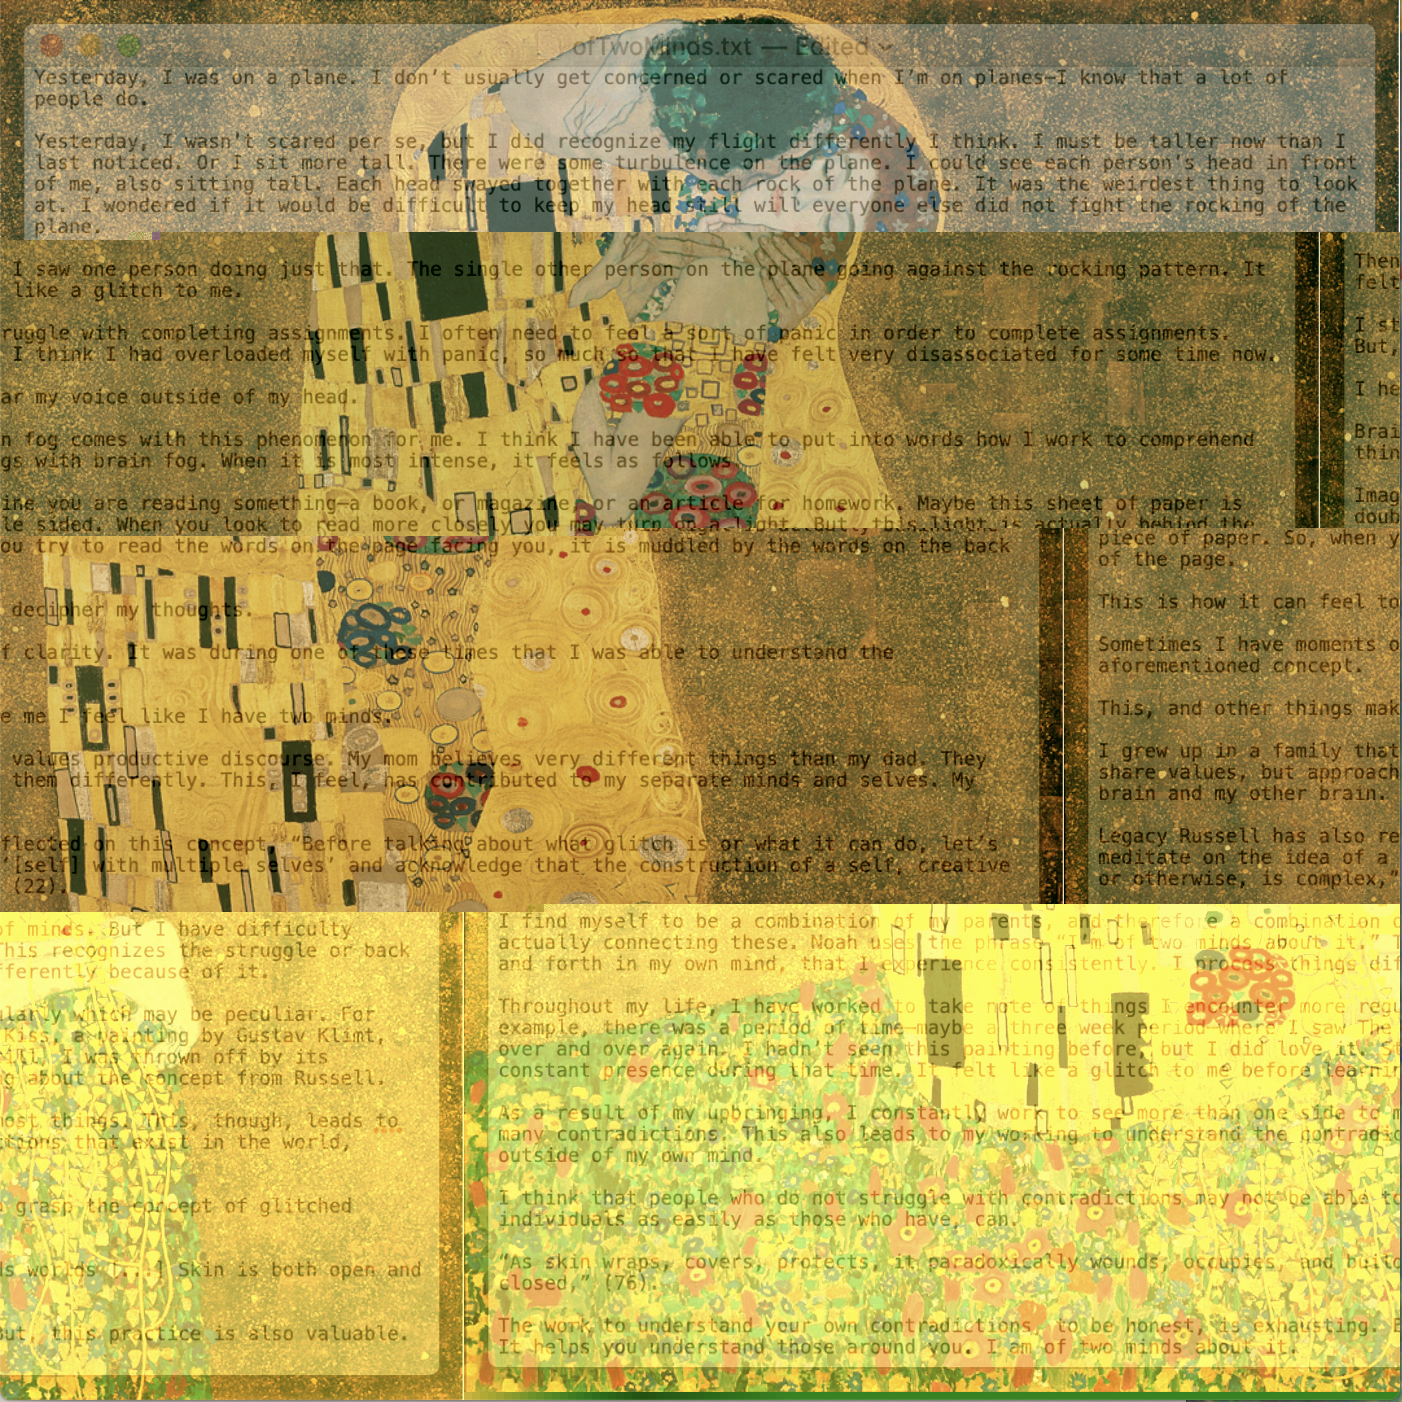 Glitched version of The Kiss by Gustav Klimt with the text from the Of Two Minds text file